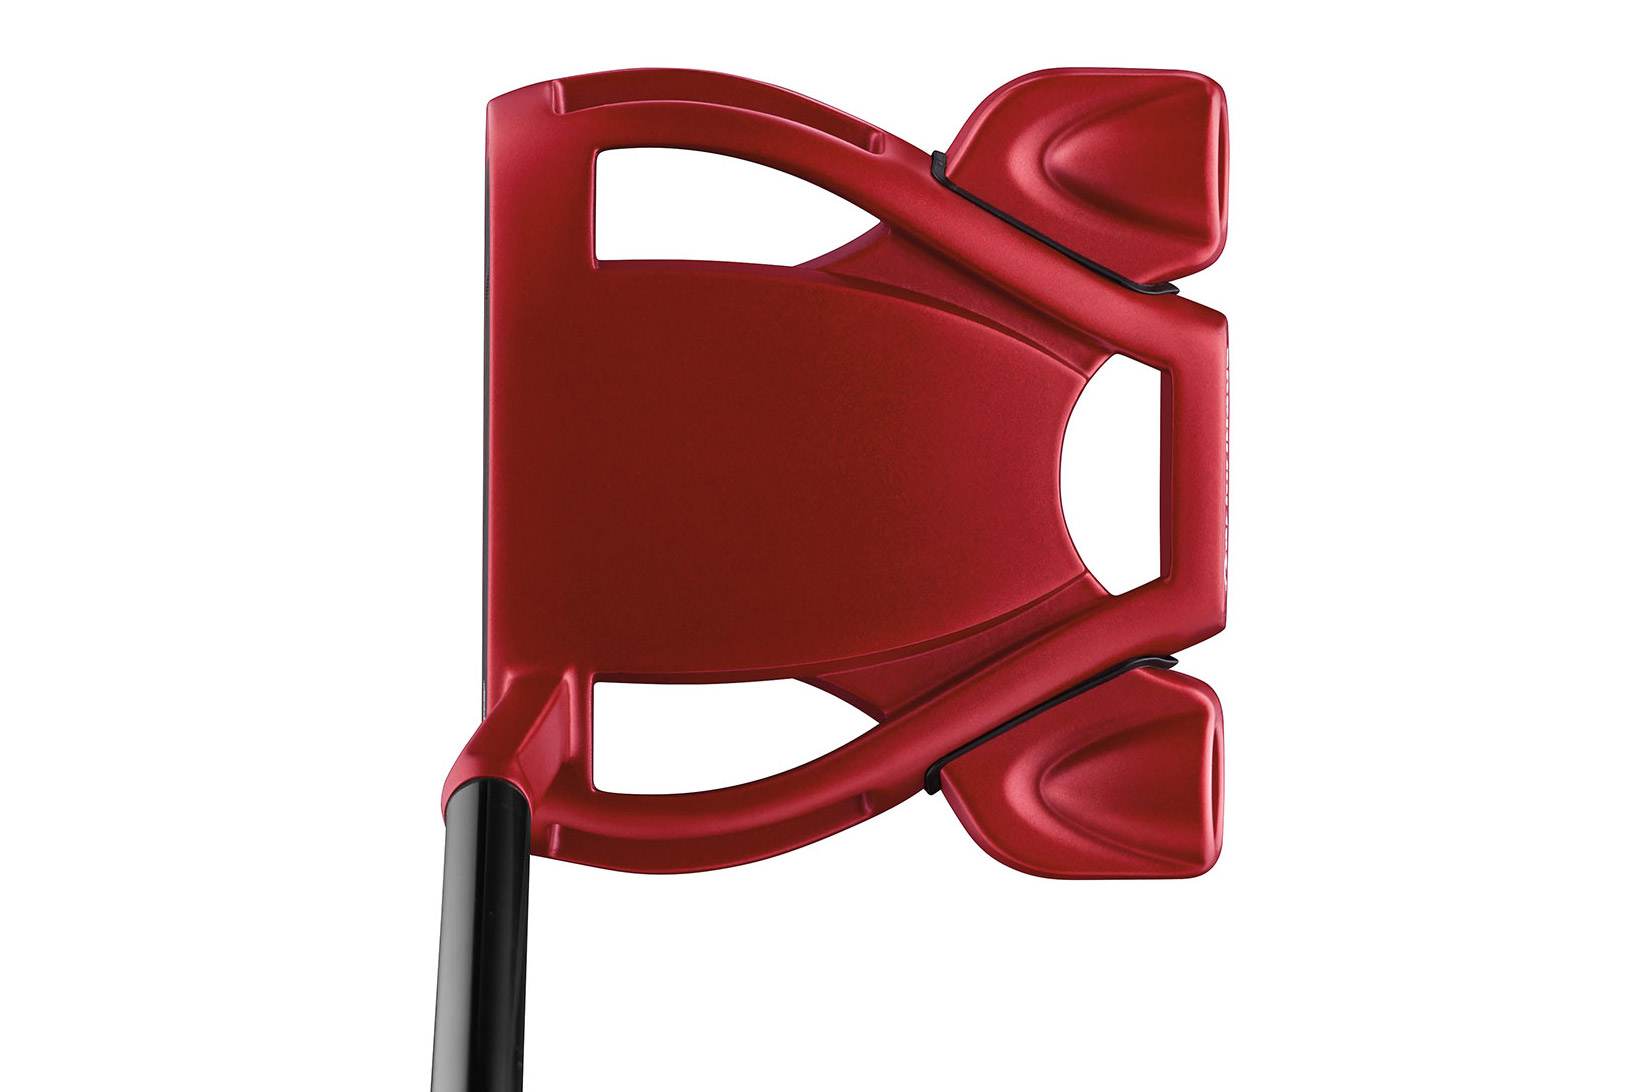 
TaylorMade Spider Tour Red Putter